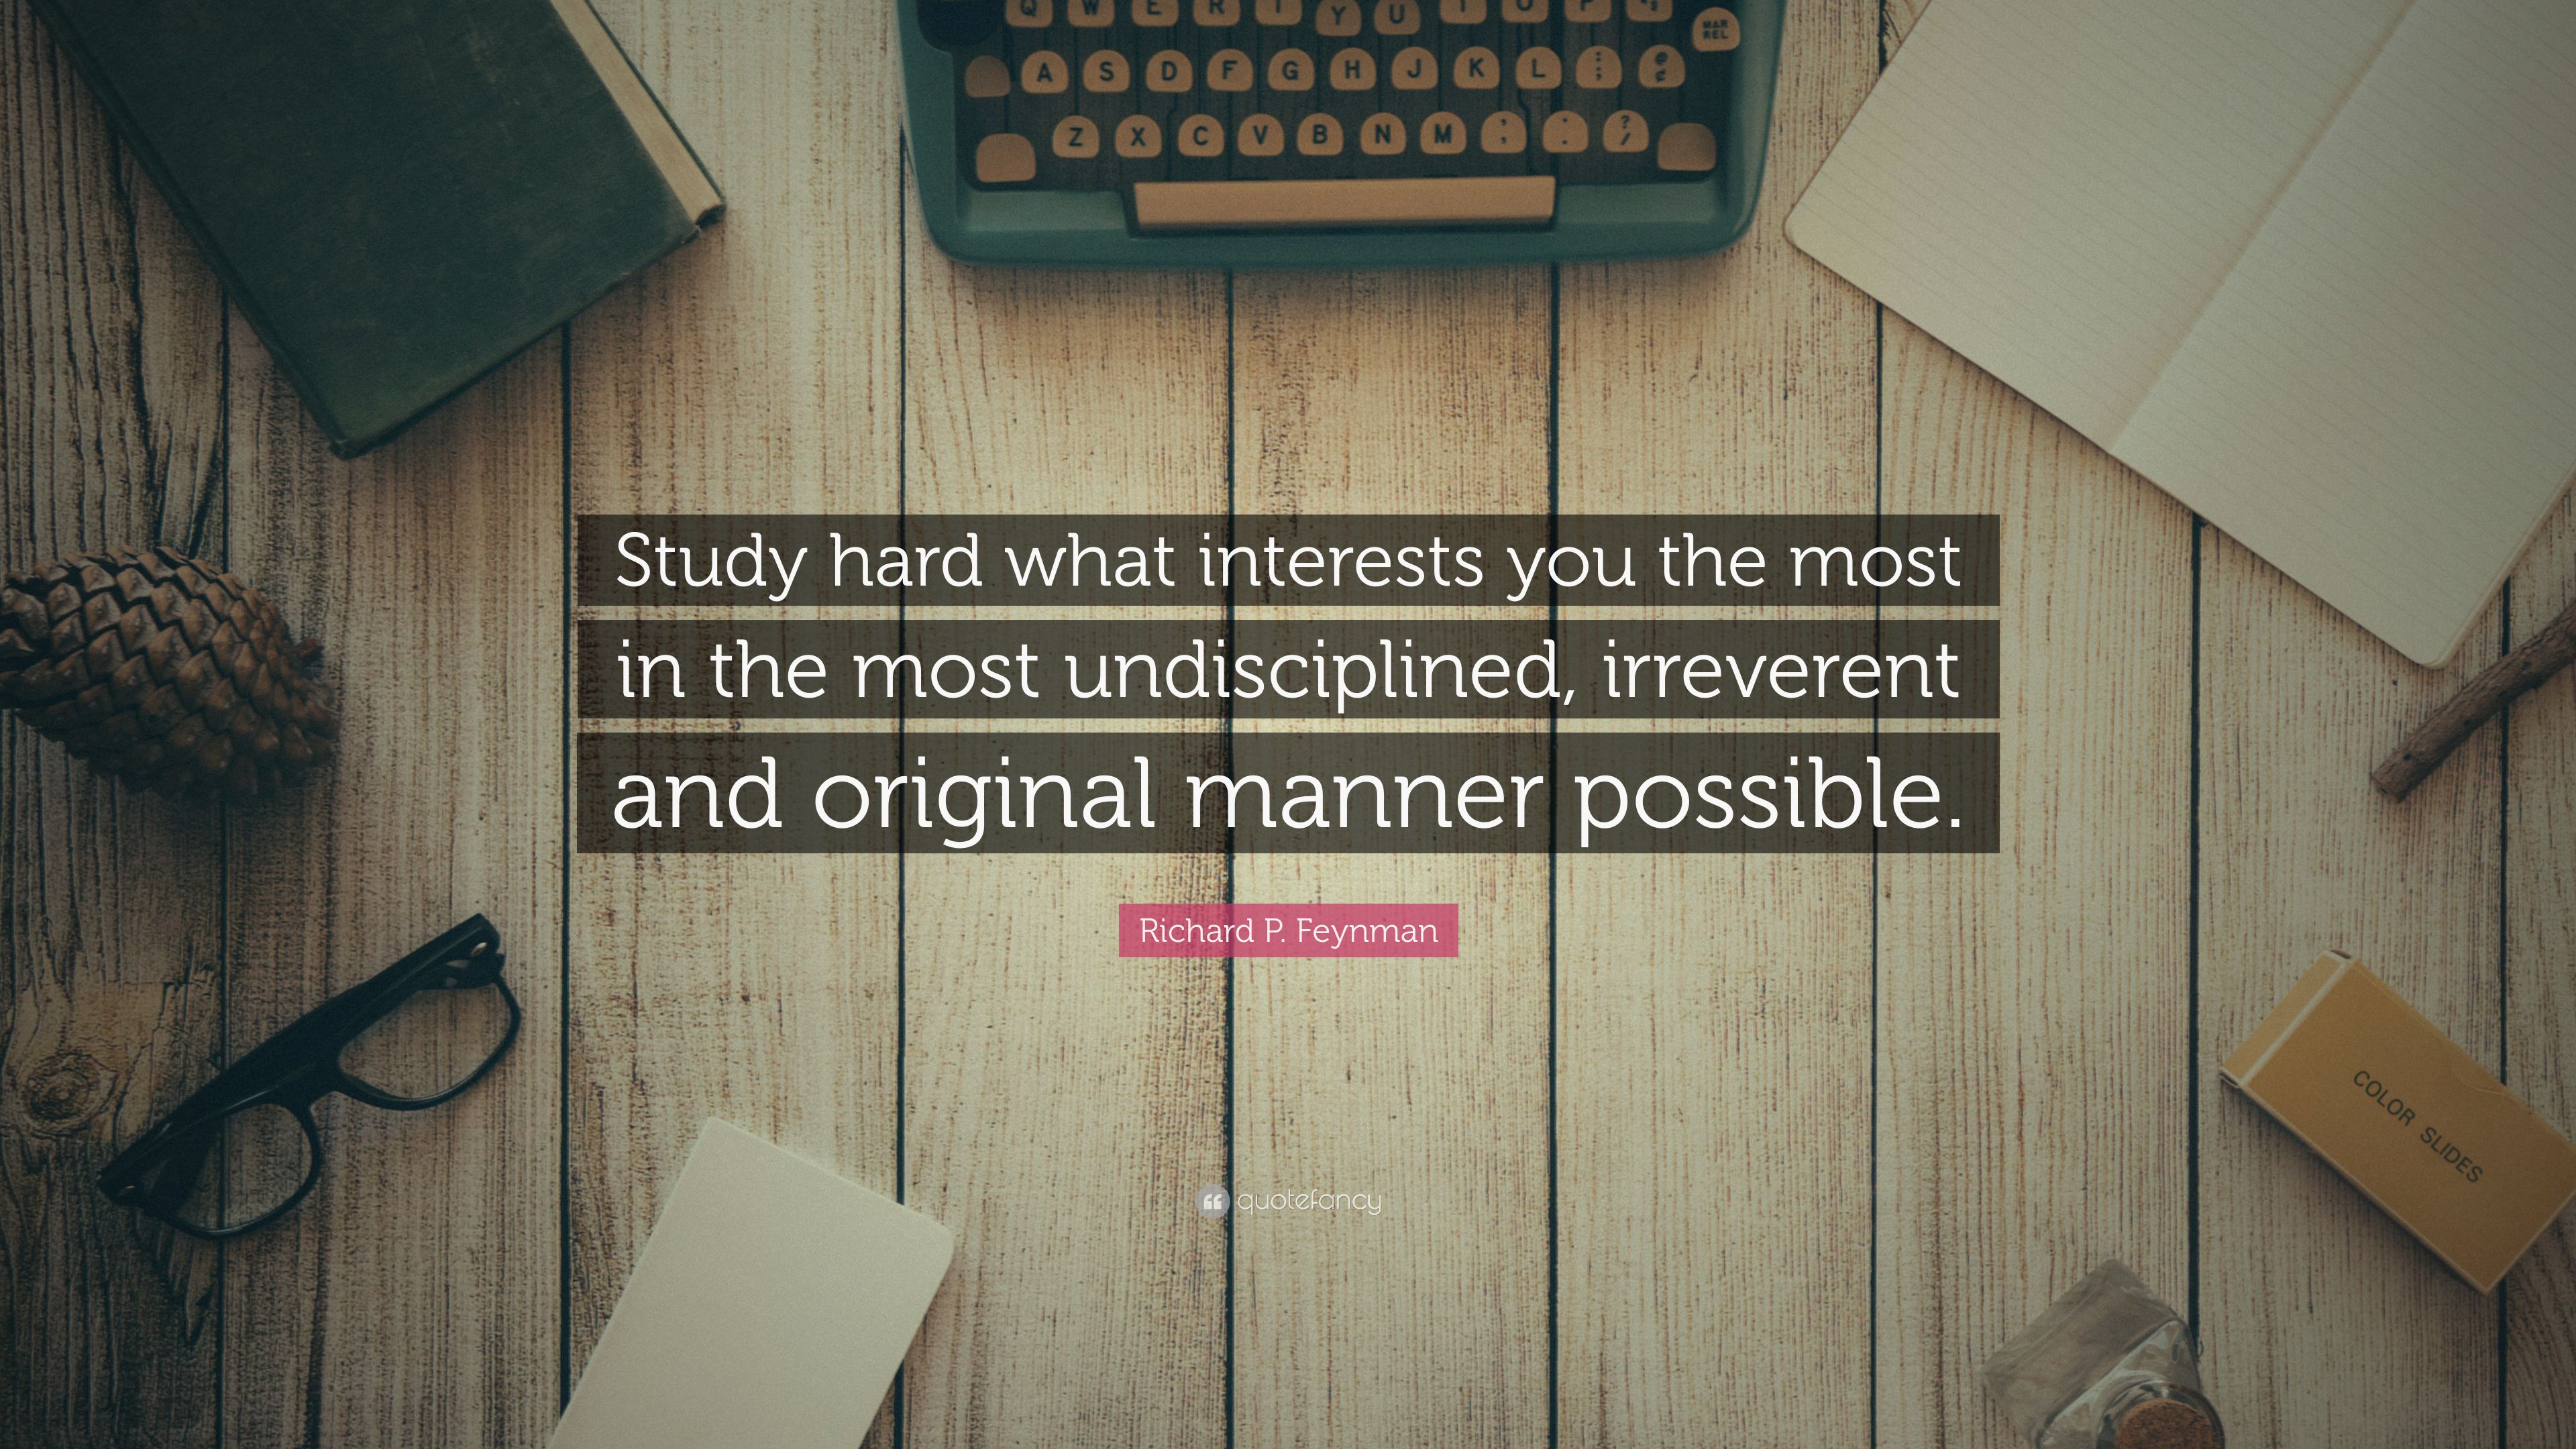 Richard P. Feynman Quote: “Study hard what interests you the most